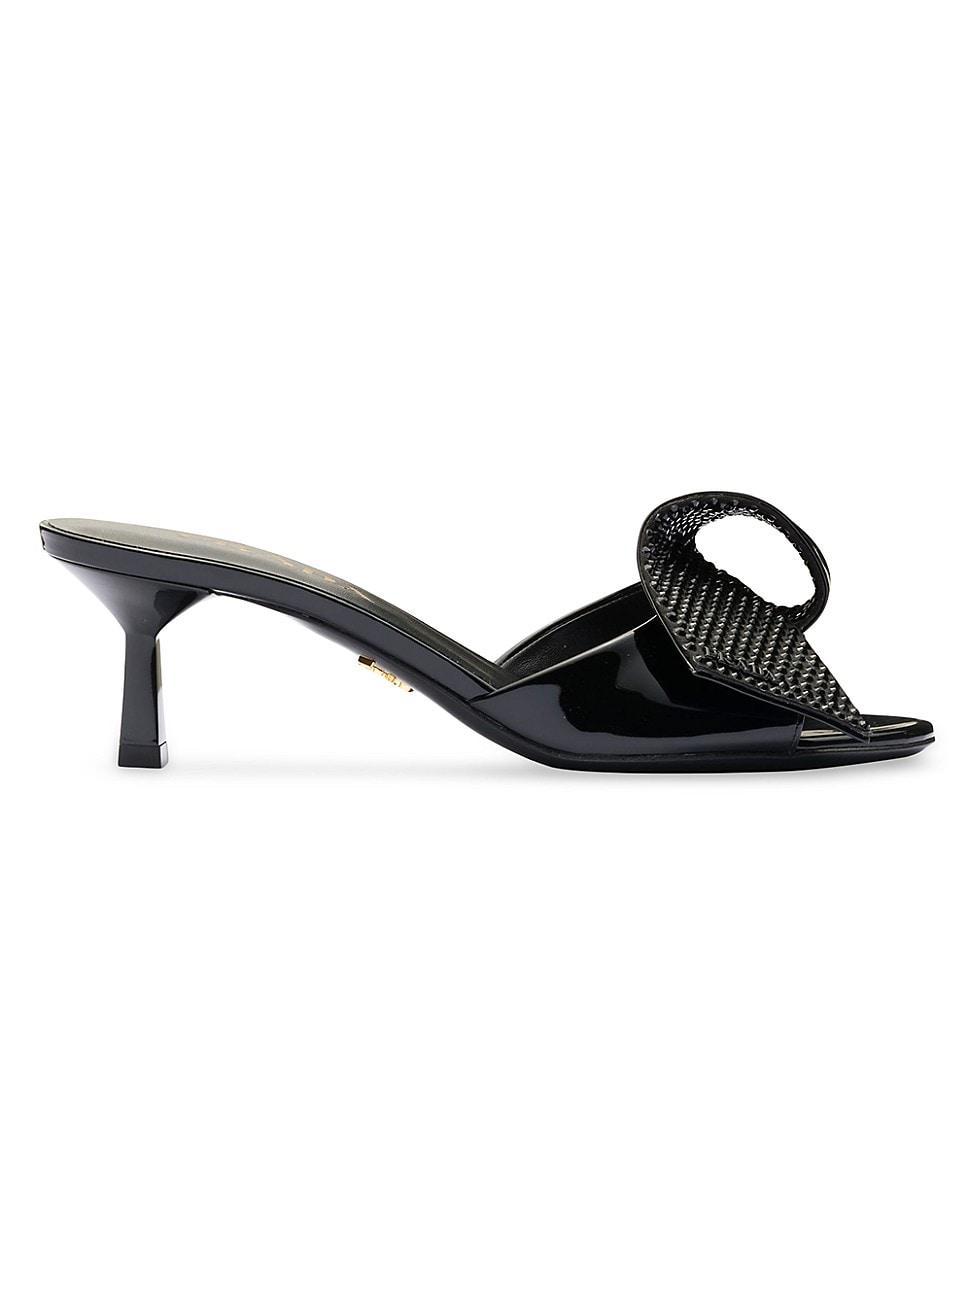 Womens Patent Leather Sandals Product Image